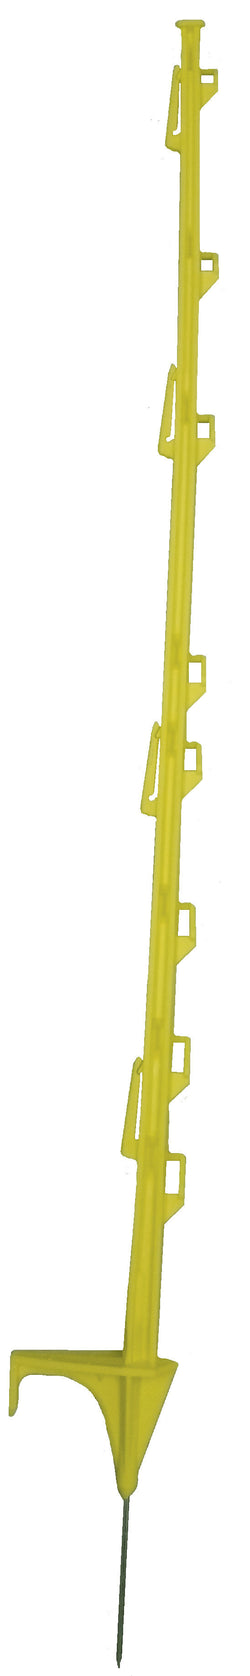 HD Tread-In Yellow Post - requires oversized shipping